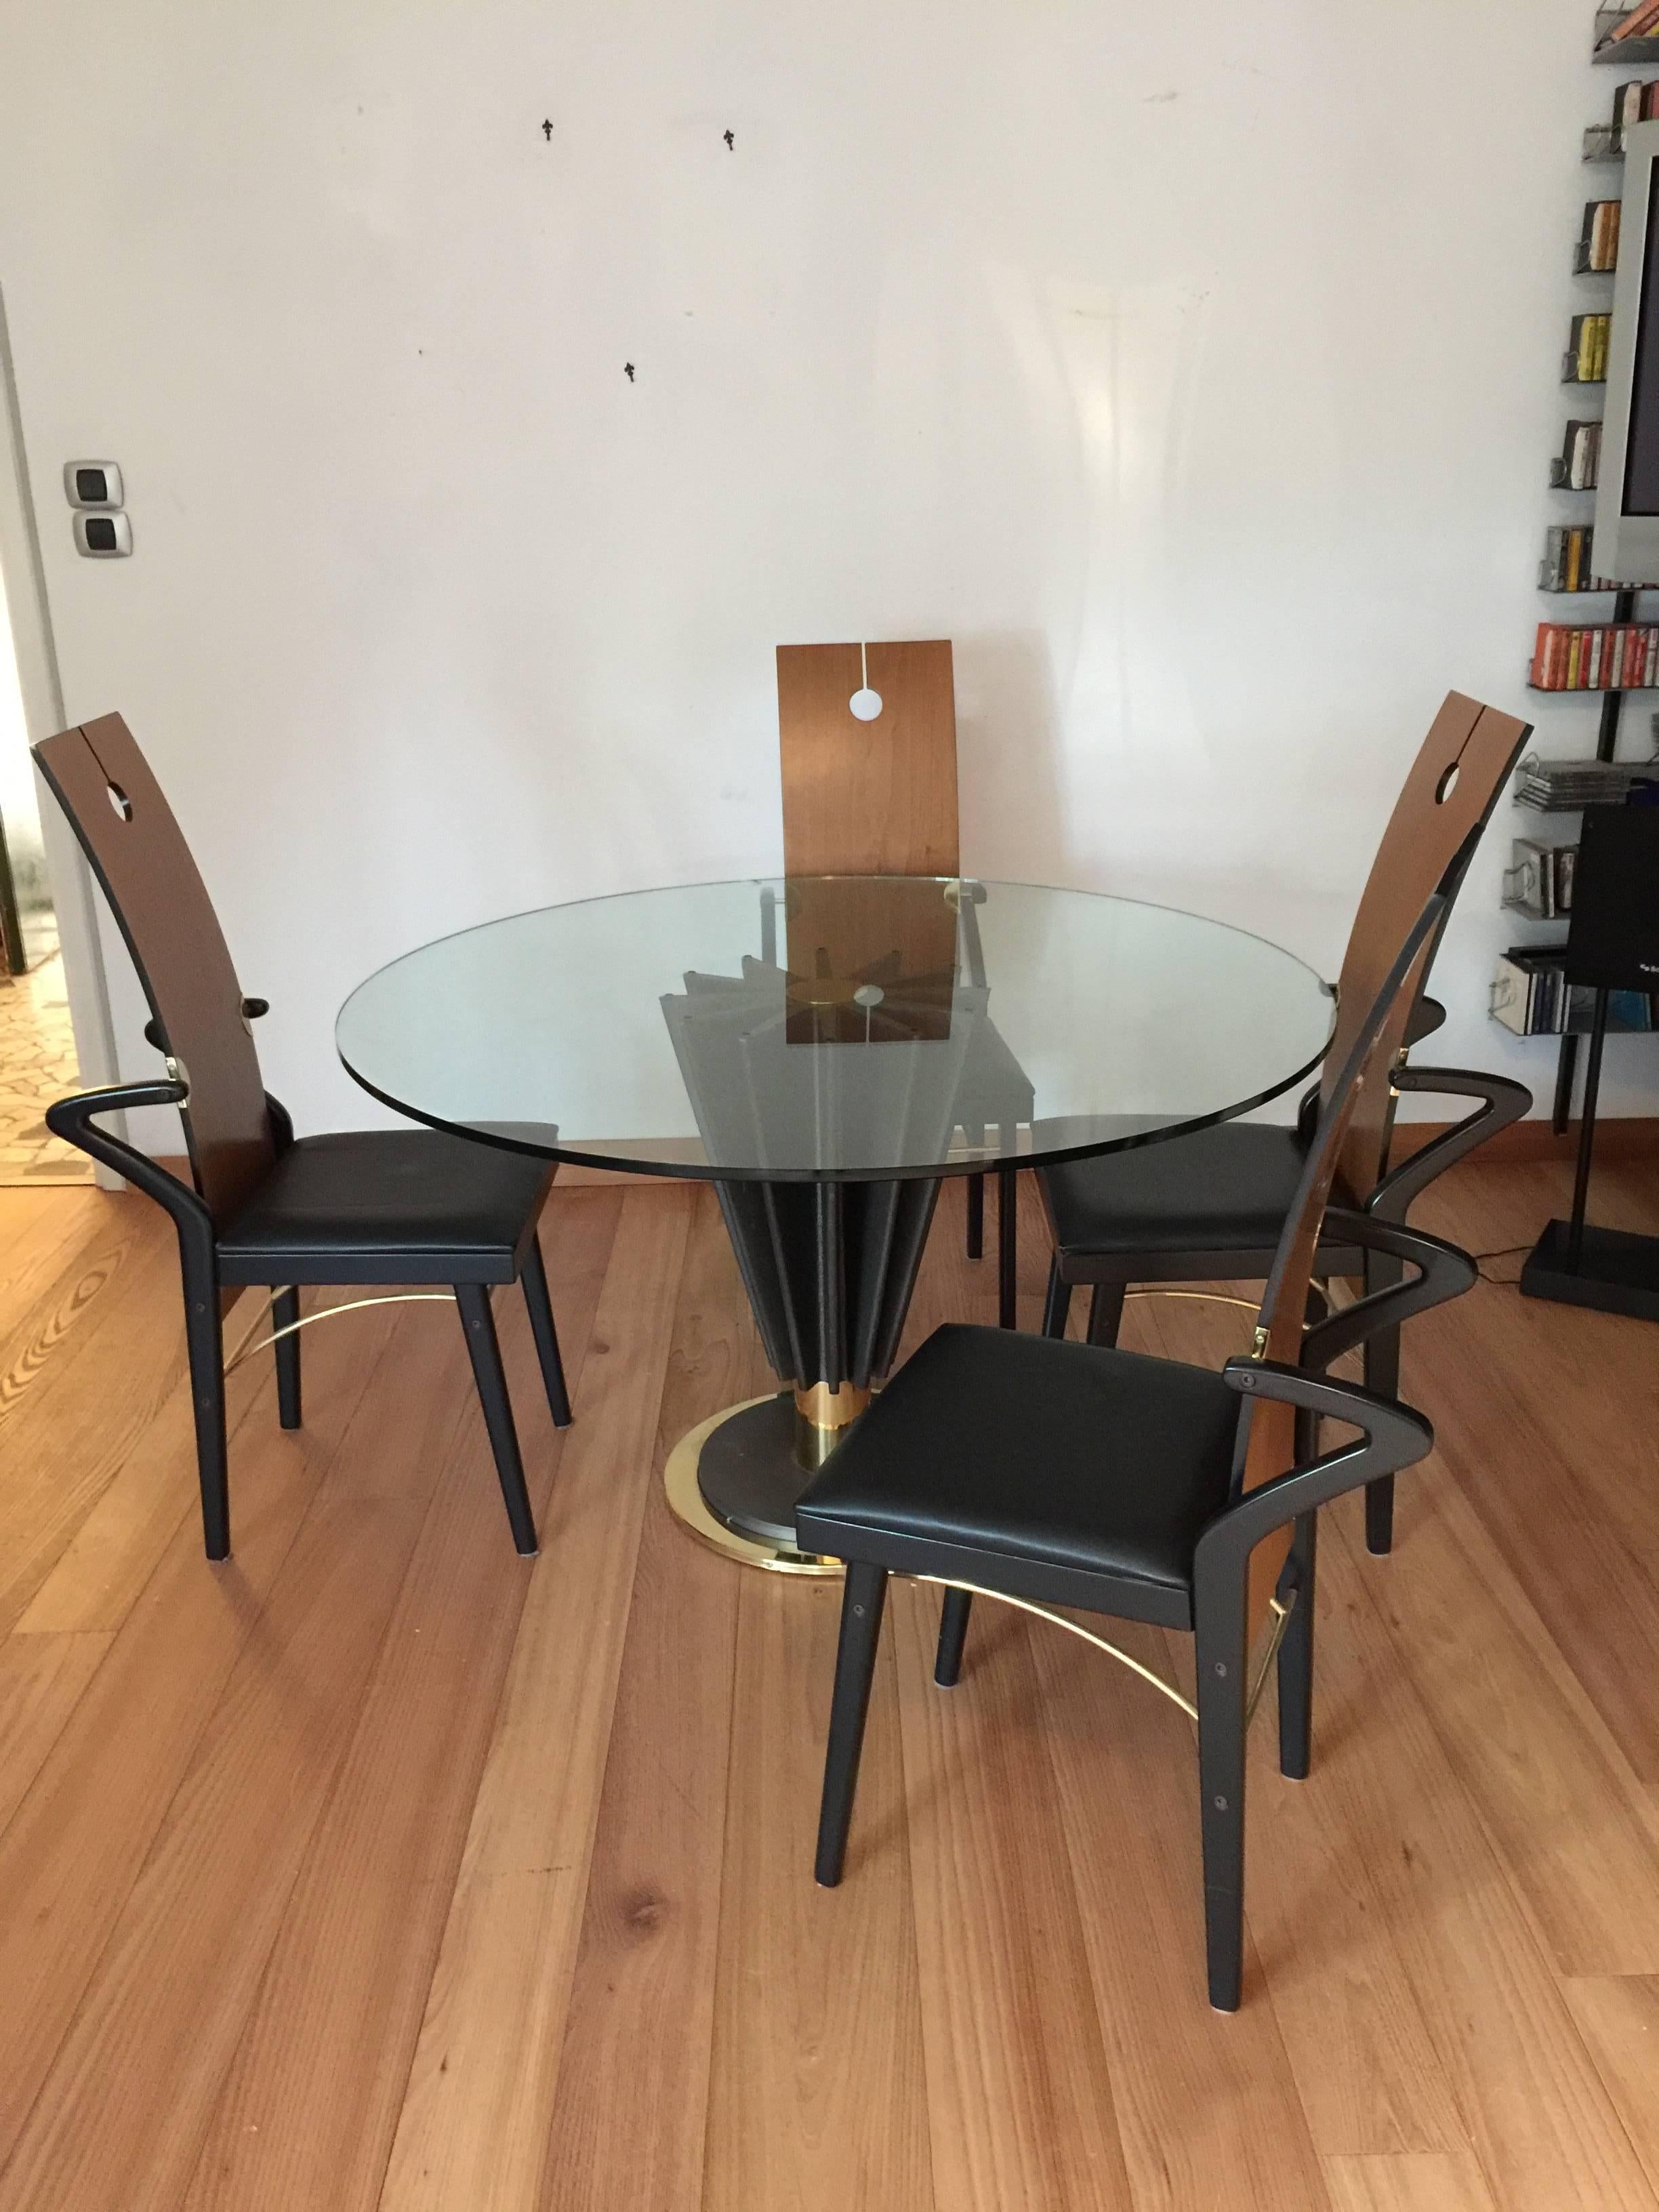 Pierre Cardin Cast Iron and Brass Dining Set, Table and Four Chairs In Excellent Condition For Sale In Padova, IT